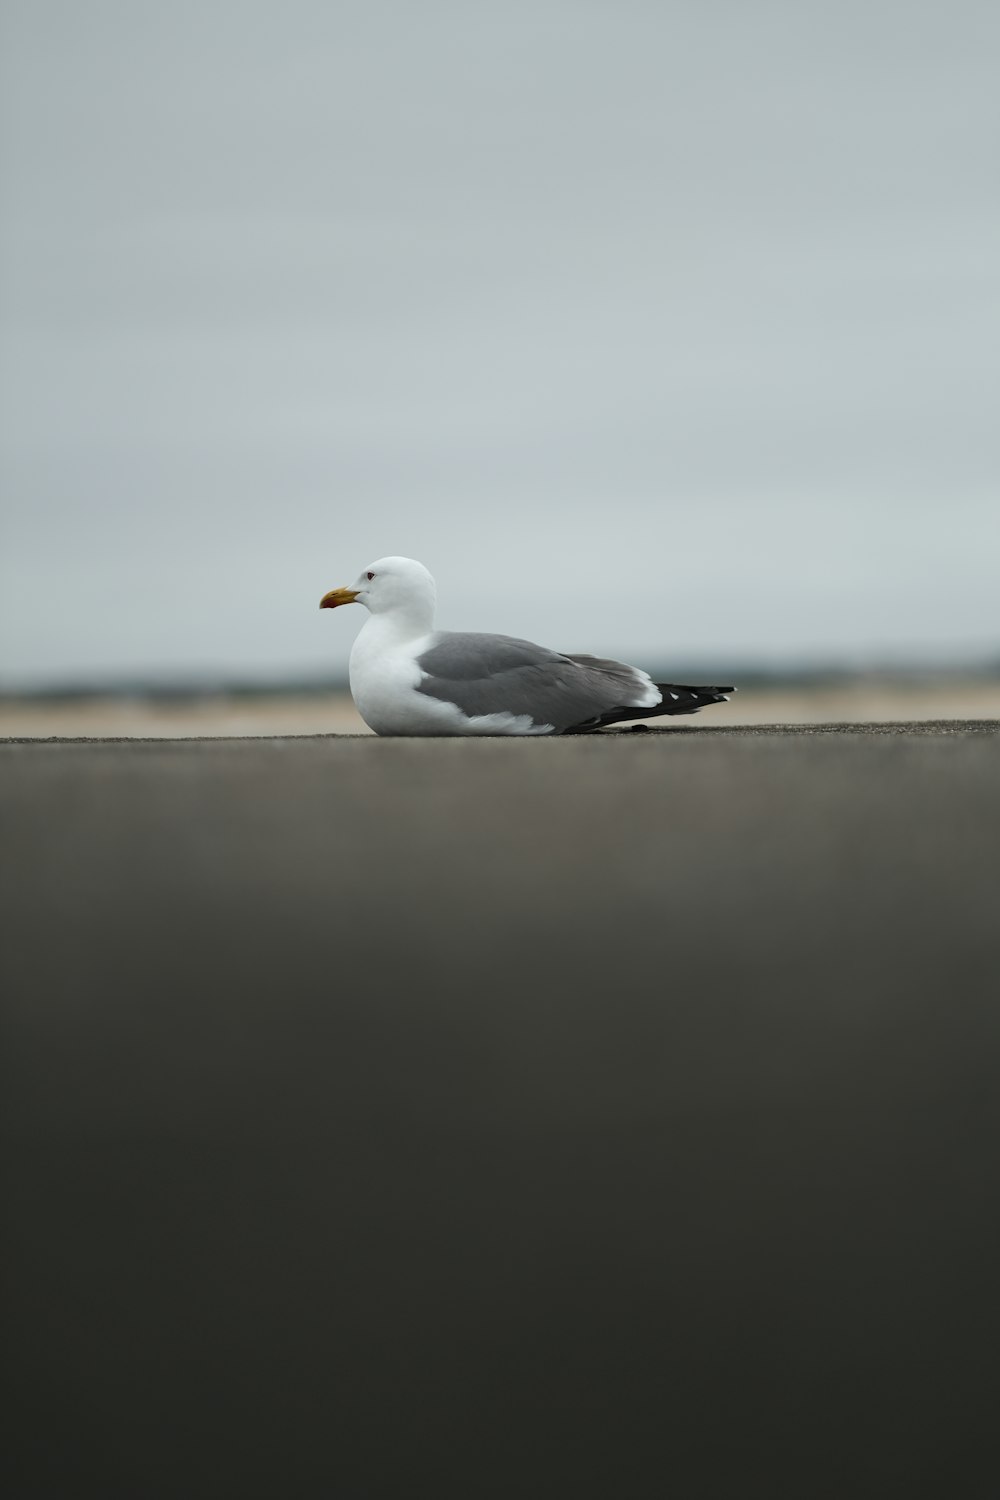 a seagull is sitting on the edge of a wall